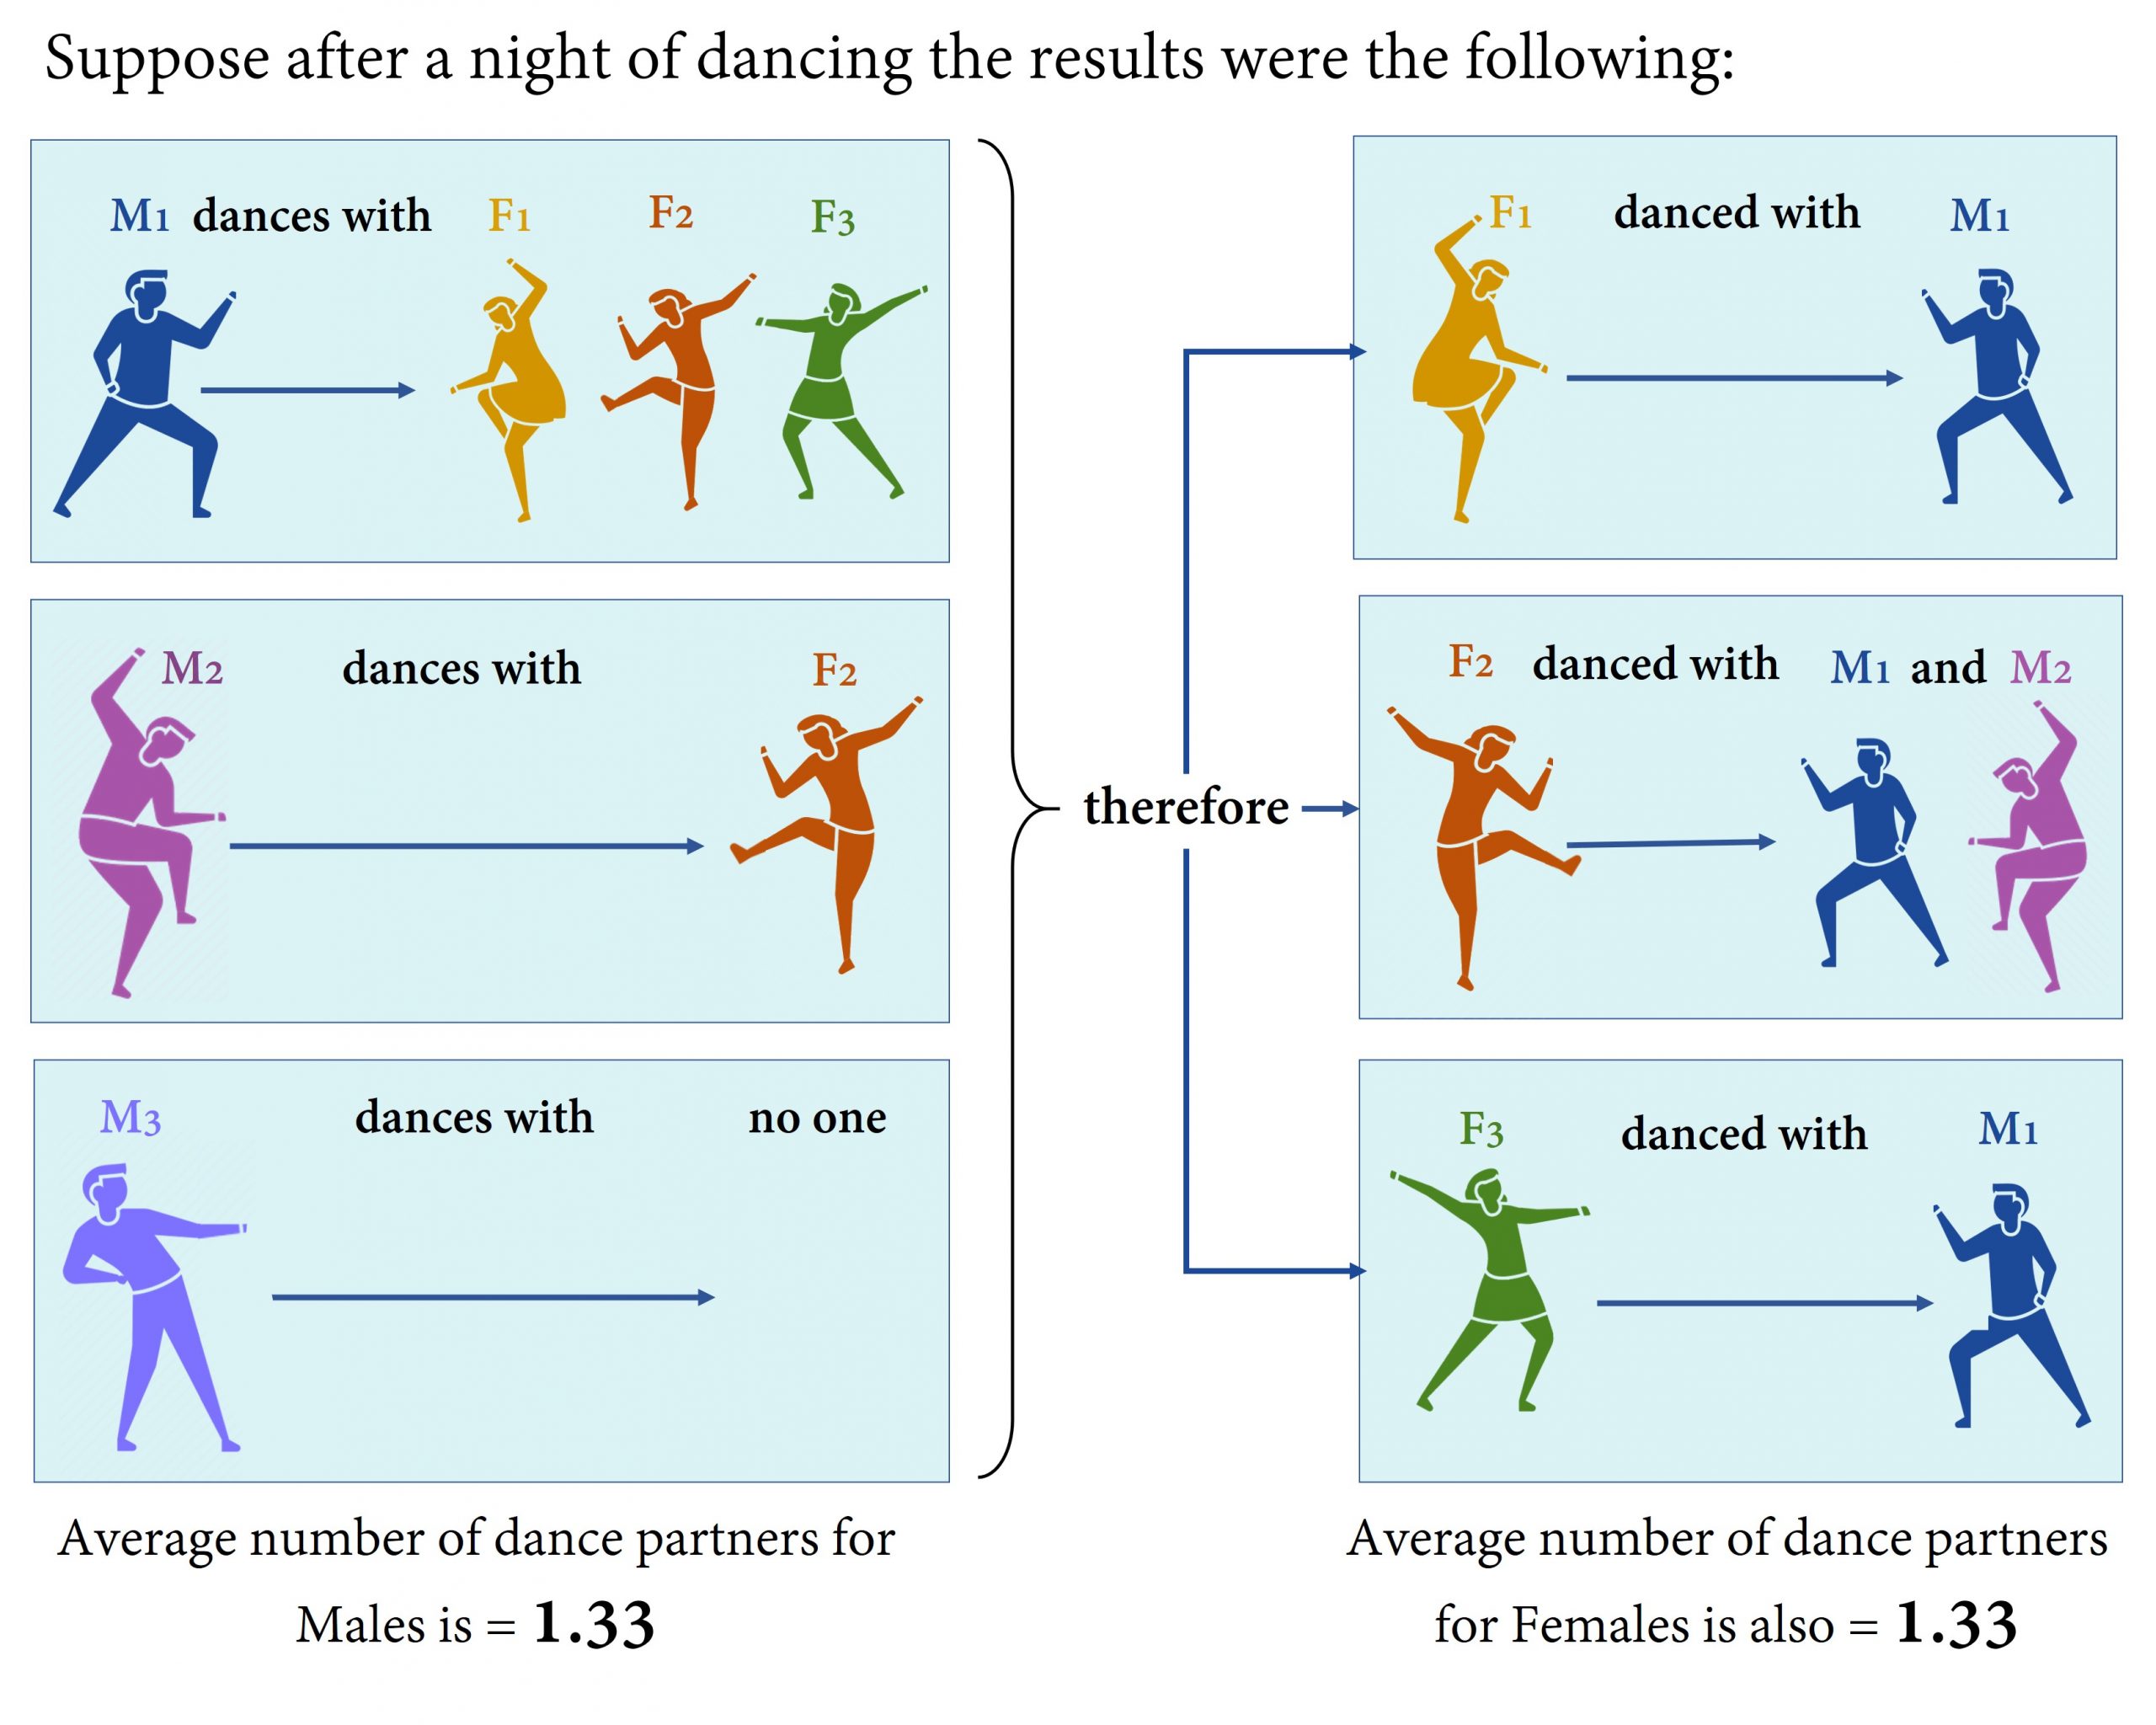 This graphic shows a blue man dancing with three women: yellow woman, red woman, and green woman. It shows a pink man dancing with only one woman, red woman. There is a third man, lavendar in colour, who dances with no one. Averaging over the three men, the men had an average of 1.33 dance partners ((3+1+0)/3. Looking at it from the women's point of view, yellow woman danced with one man - blue man. Green woman danced with one man - blue man. Red woman danced with both blue man and pink man. The women had an average of 1.33 dance partners (1+1+2)/3